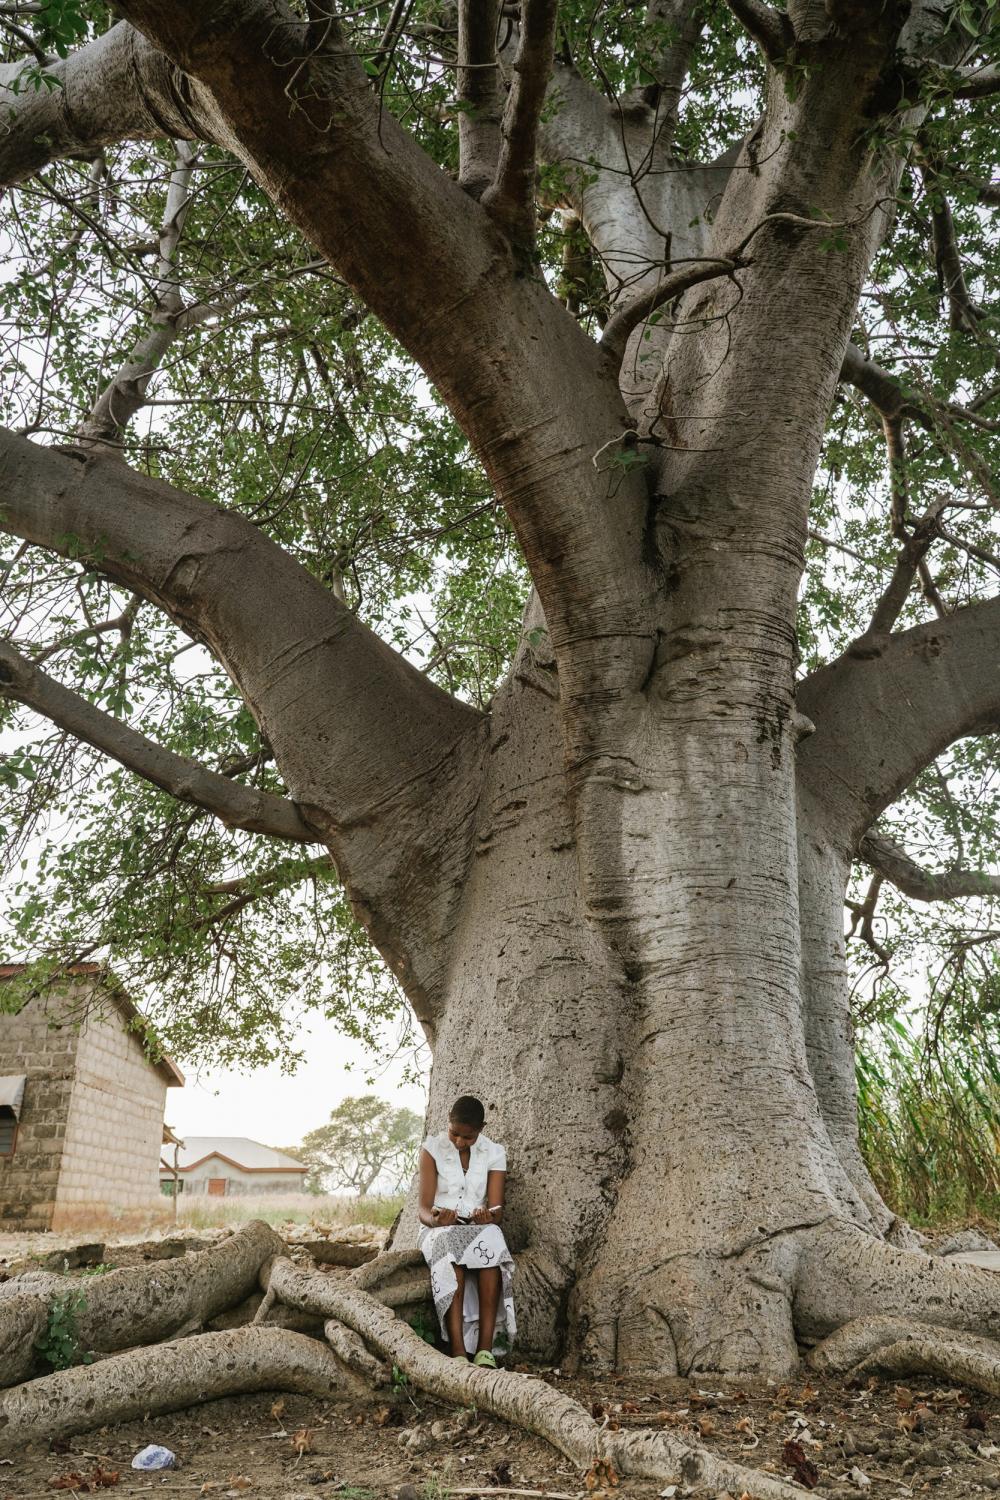 &ldquo;Knowledge is like a Baobab tree, one person&rsquo;s arms cannot encompass it&rdquo; GHANIAN PROVERB.&nbsp; Francisca Akanko(14), student of Azenab Girls Primary School, reads a book under a baobab tree outside her house in Wiaga, Upper East Region of Ghana, October 27, 2021